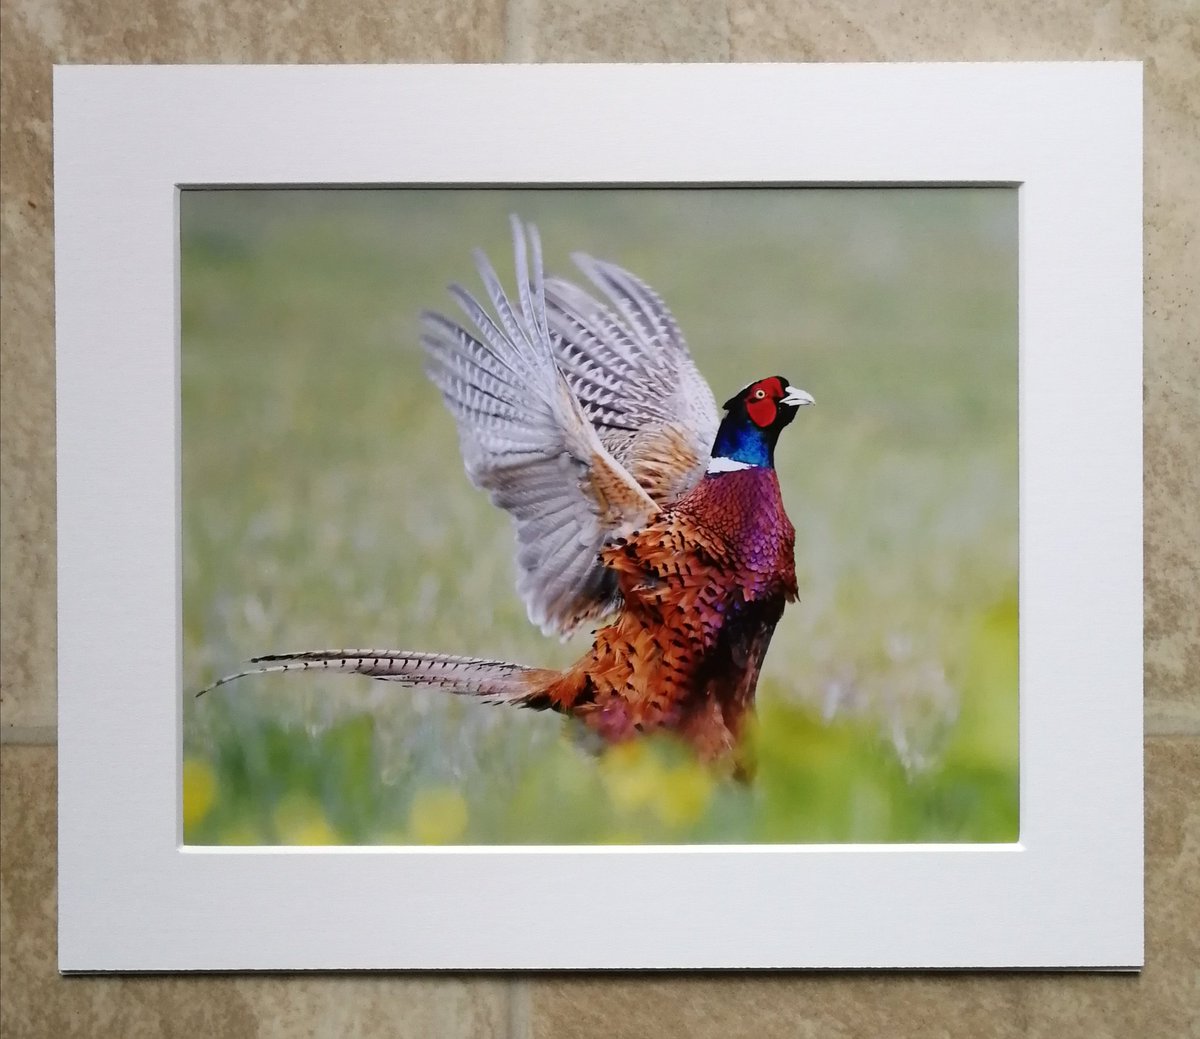 'Male Pheasant in a flap' 10x8 mounted print.  Something colourful for your wall! You can buy it here; https://www.carlbovis.com/product-page/wings-up-pheasant-10x8-mounted-print 